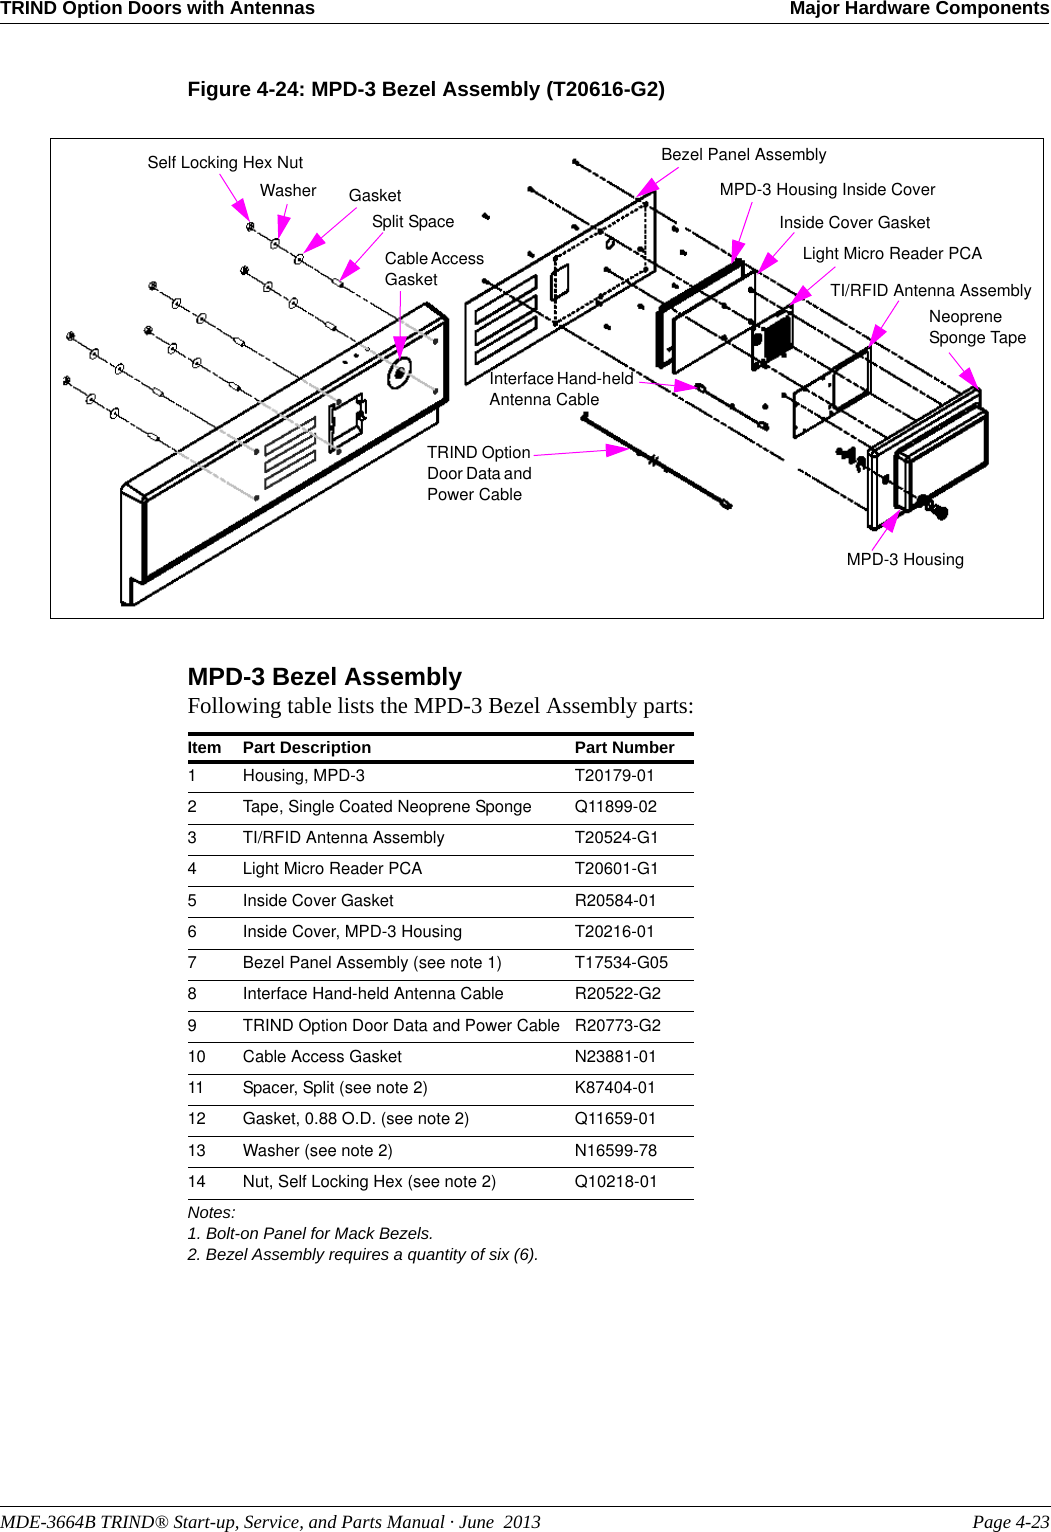 MDE-3664B TRIND® Start-up, Service, and Parts Manual · June  2013 Page 4-23TRIND Option Doors with Antennas Major Hardware ComponentsFigure 4-24: MPD-3 Bezel Assembly (T20616-G2)TRIND Option Door Data and Power CableInterface Hand-held Antenna CableMPD-3 HousingCable Access GasketSelf Locking Hex NutWasher GasketSplit SpaceBezel Panel AssemblyMPD-3 Housing Inside CoverInside Cover GasketLight Micro Reader PCATI/RFID Antenna AssemblyNeoprene Sponge TapeMPD-3 Bezel AssemblyFollowing table lists the MPD-3 Bezel Assembly parts:Item Part Description Part Number1Housing, MPD-3 T20179-012Tape, Single Coated Neoprene Sponge Q11899-023TI/RFID Antenna Assembly T20524-G14Light Micro Reader PCA T20601-G15Inside Cover Gasket R20584-016Inside Cover, MPD-3 Housing T20216-017Bezel Panel Assembly (see note 1) T17534-G058Interface Hand-held Antenna Cable R20522-G29TRIND Option Door Data and Power Cable R20773-G210 Cable Access Gasket N23881-0111 Spacer, Split (see note 2) K87404-0112 Gasket, 0.88 O.D. (see note 2) Q11659-0113 Washer (see note 2) N16599-7814 Nut, Self Locking Hex (see note 2) Q10218-01Notes:1. Bolt-on Panel for Mack Bezels.2. Bezel Assembly requires a quantity of six (6).